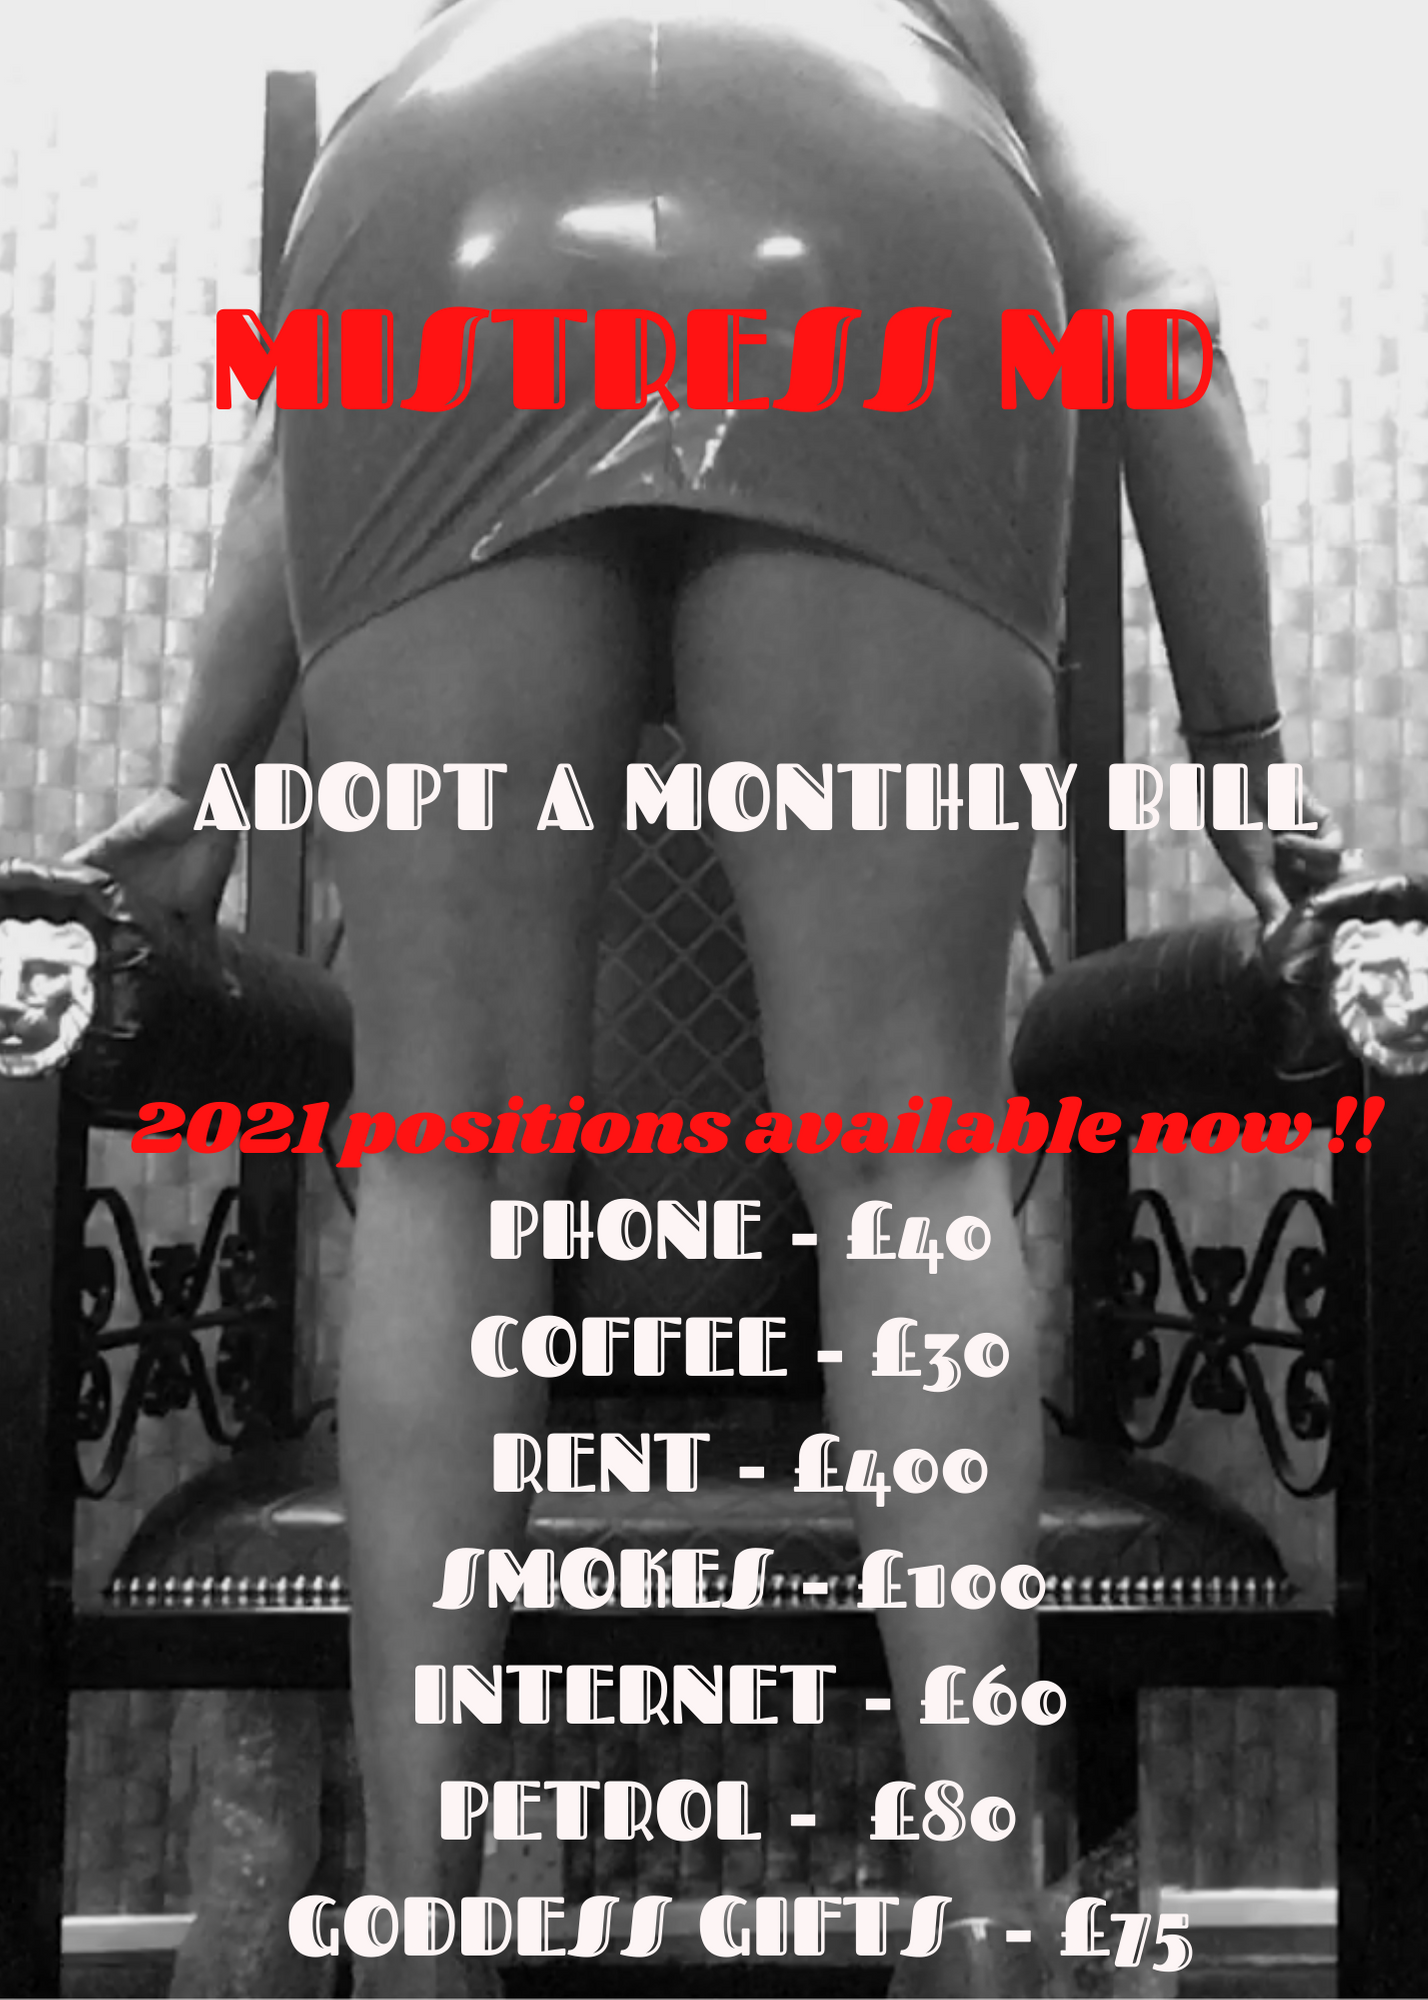 Photo by MistressMD with the username @MistressMD, who is a star user,  January 1, 2021 at 6:14 PM and the text says 'Start your year as you mean to go on... adopt my bills & nurture them, give them that secure, safe & loving feeling for 2021🤑

SUBSCRIBE to either of my paysites #AVNstars or #Onlyfans Then you may DM to discuss & apply 👸🏾

And don’t forget to keep..'